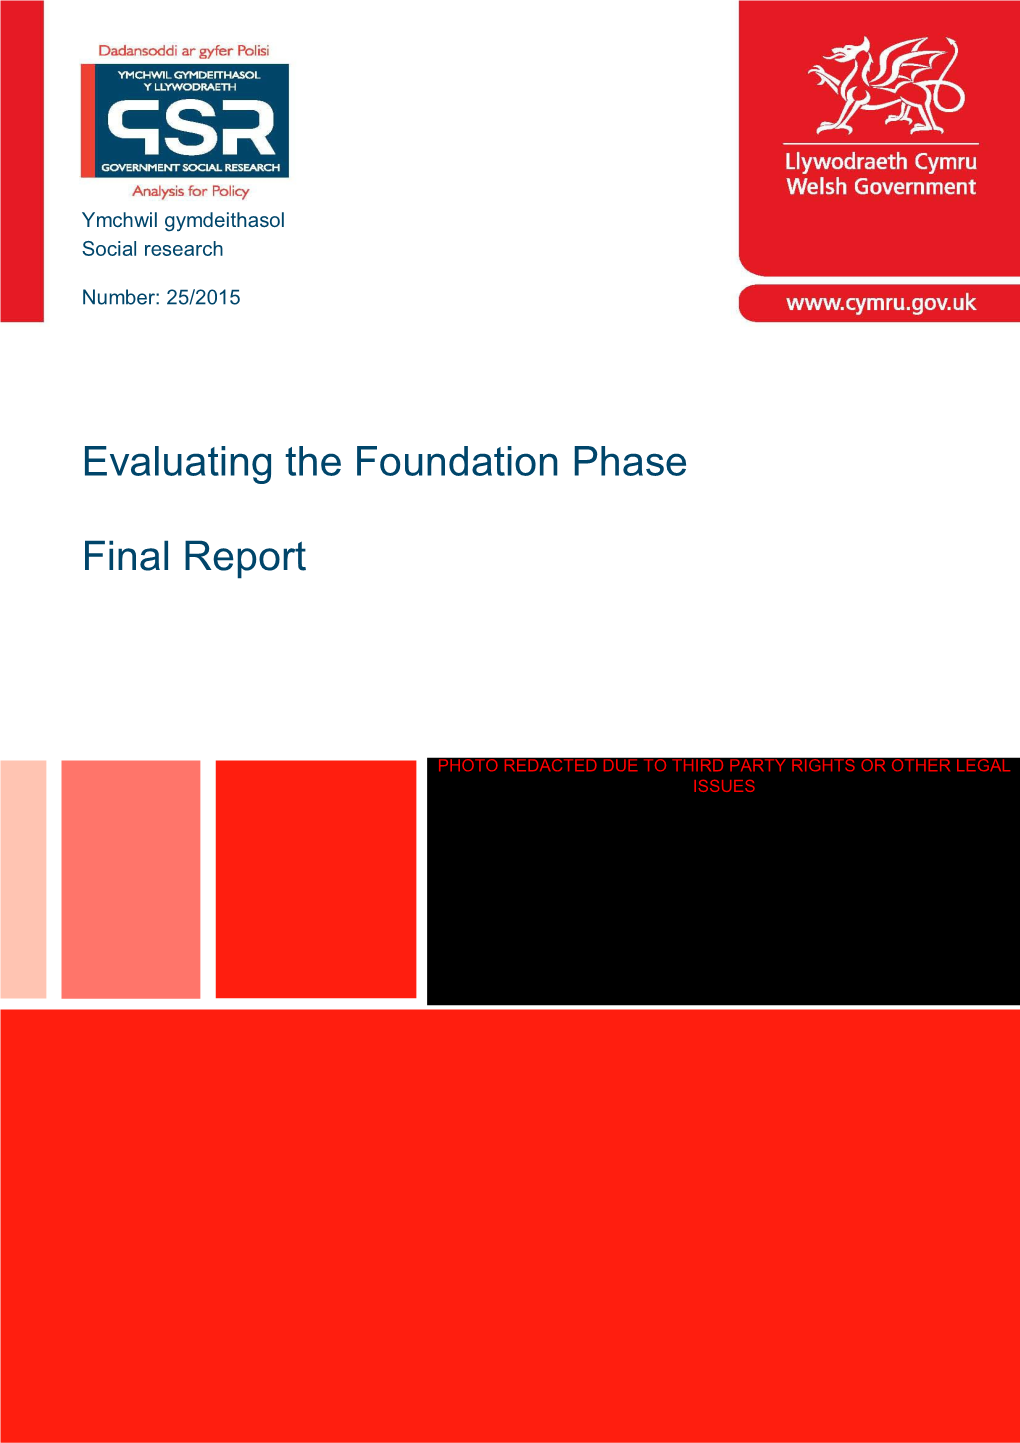 Evaluating the Foundation Phase: Final Report